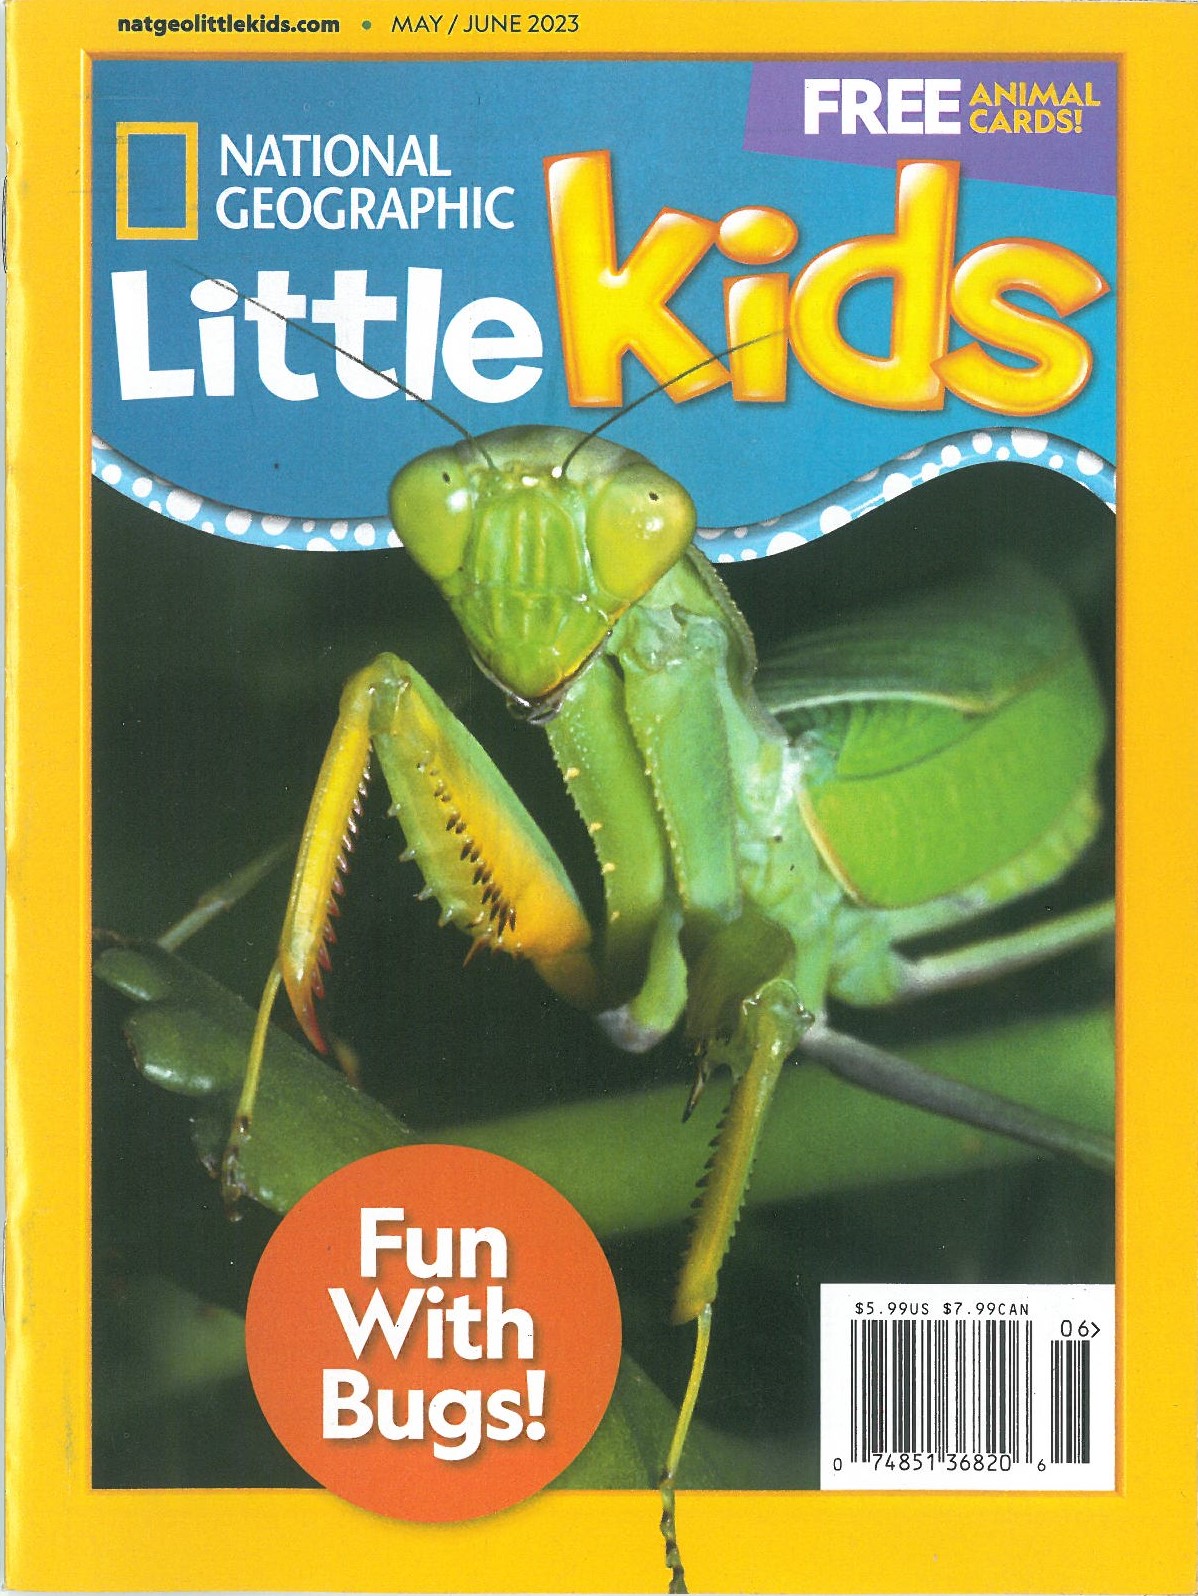 NATIONAL GEOGRAPHIC LITTLE KIDS ISSUE OF JAN/FEB 2022